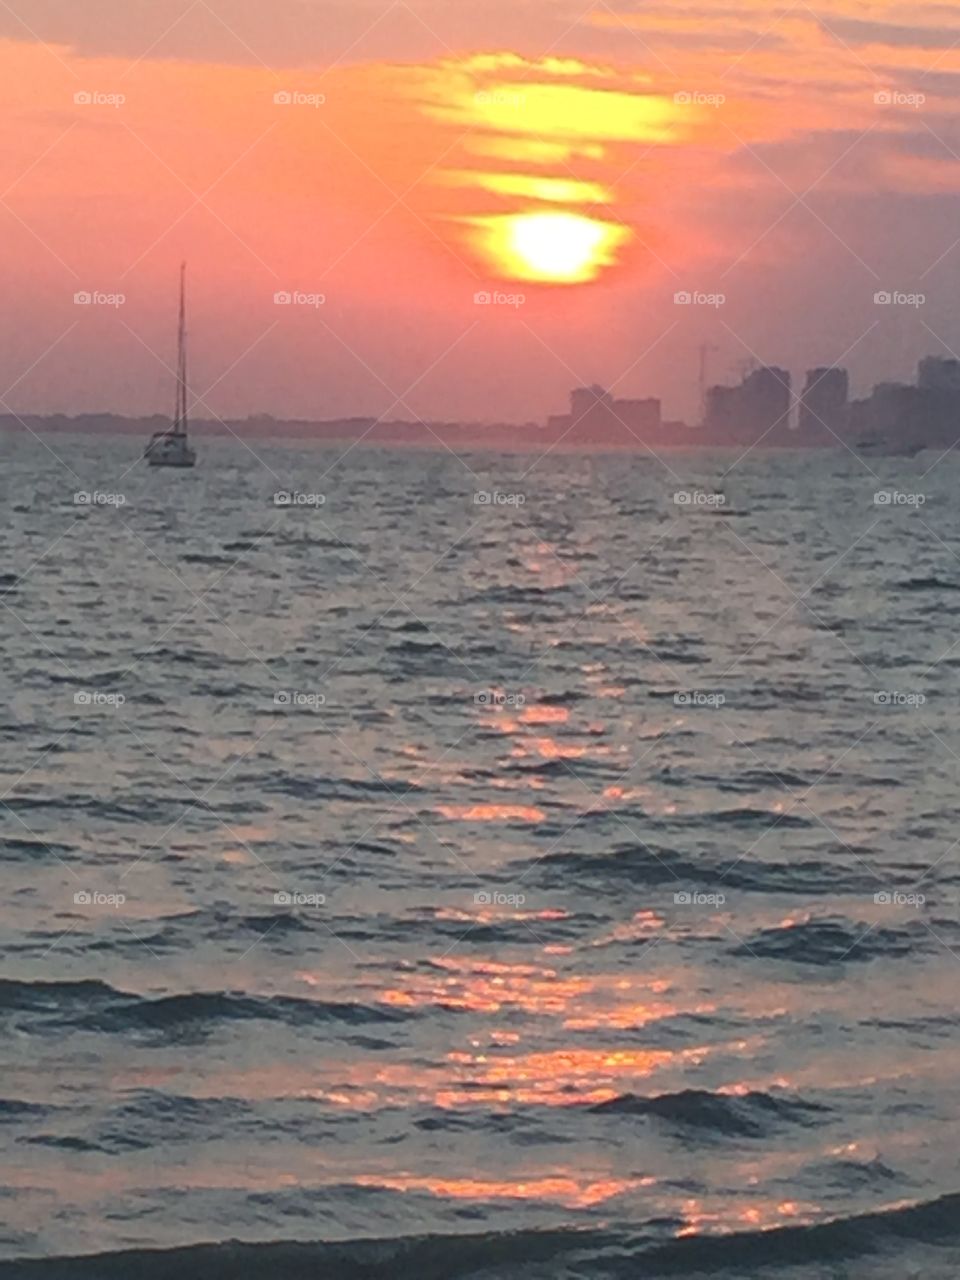 Perfect sunset in Miami